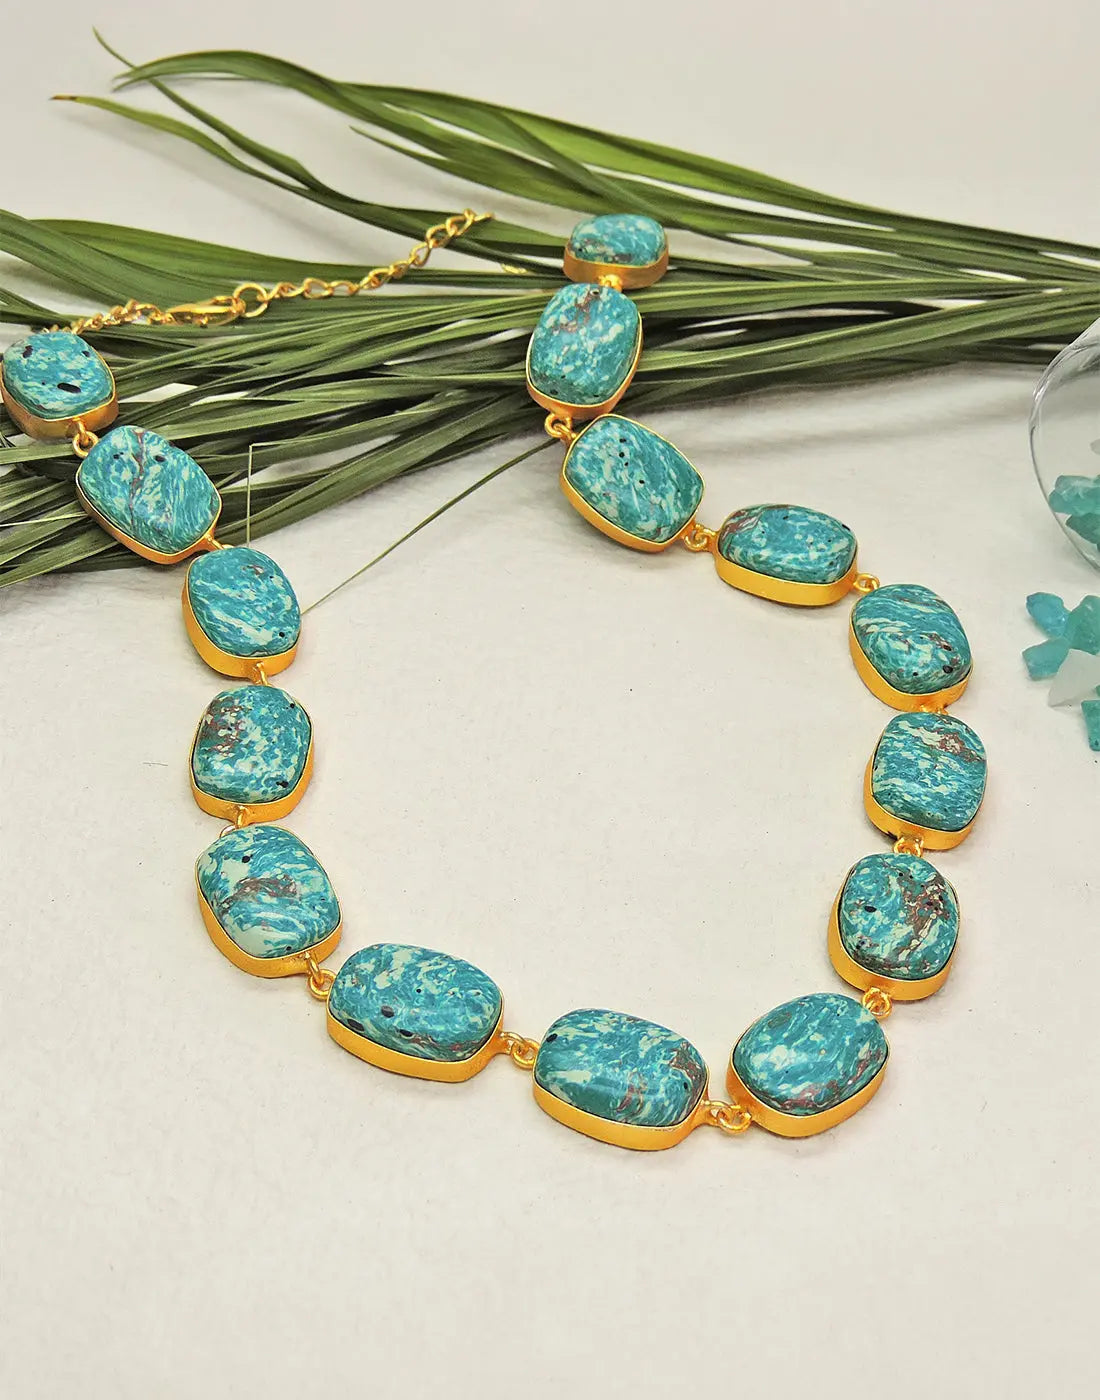 Nahla Necklace- Handcrafted Jewellery from Dori